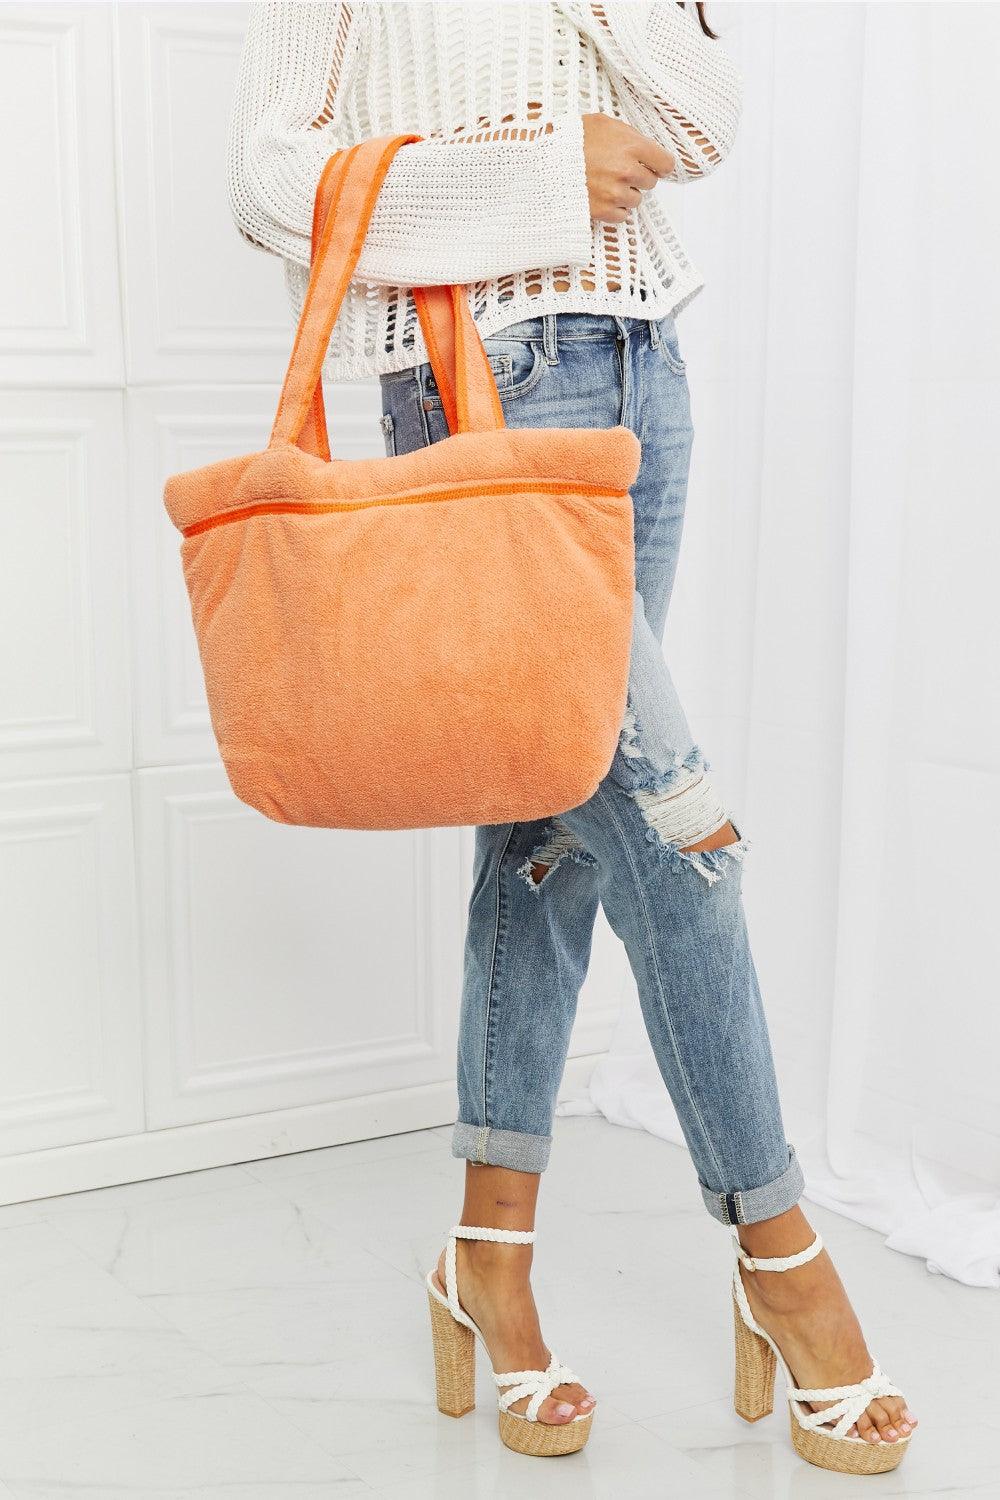 Fame Found My Paradise Tote Bag Tangerine One Size Handbags